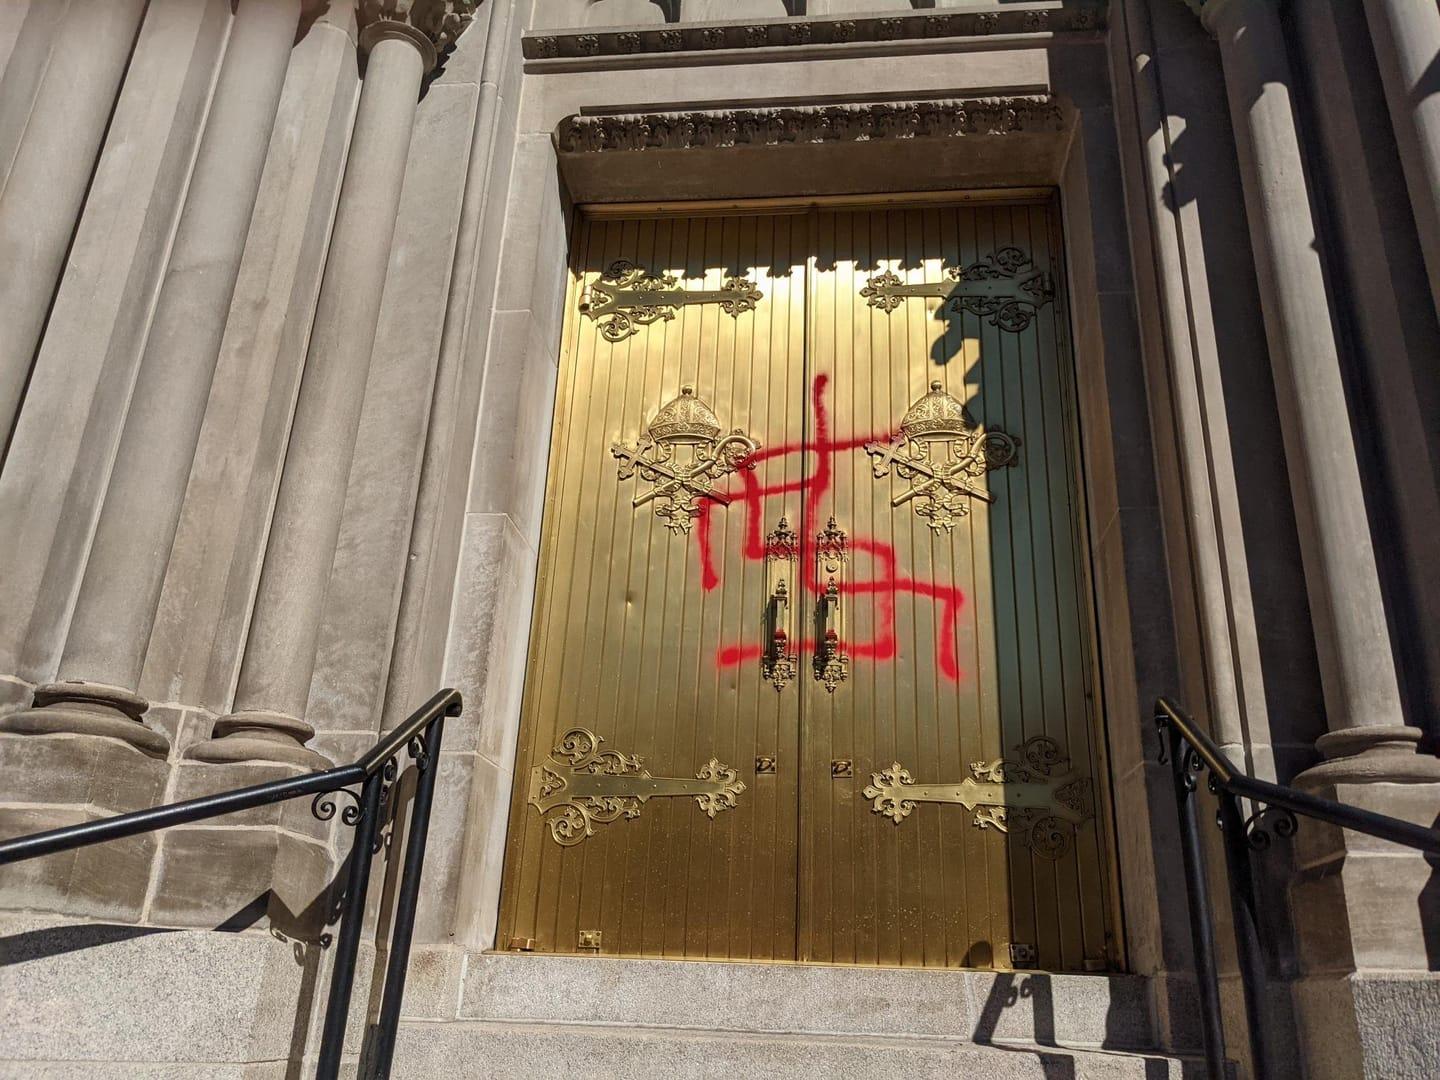 Vandalism at Denver’s cathedral is latest incident against local churches